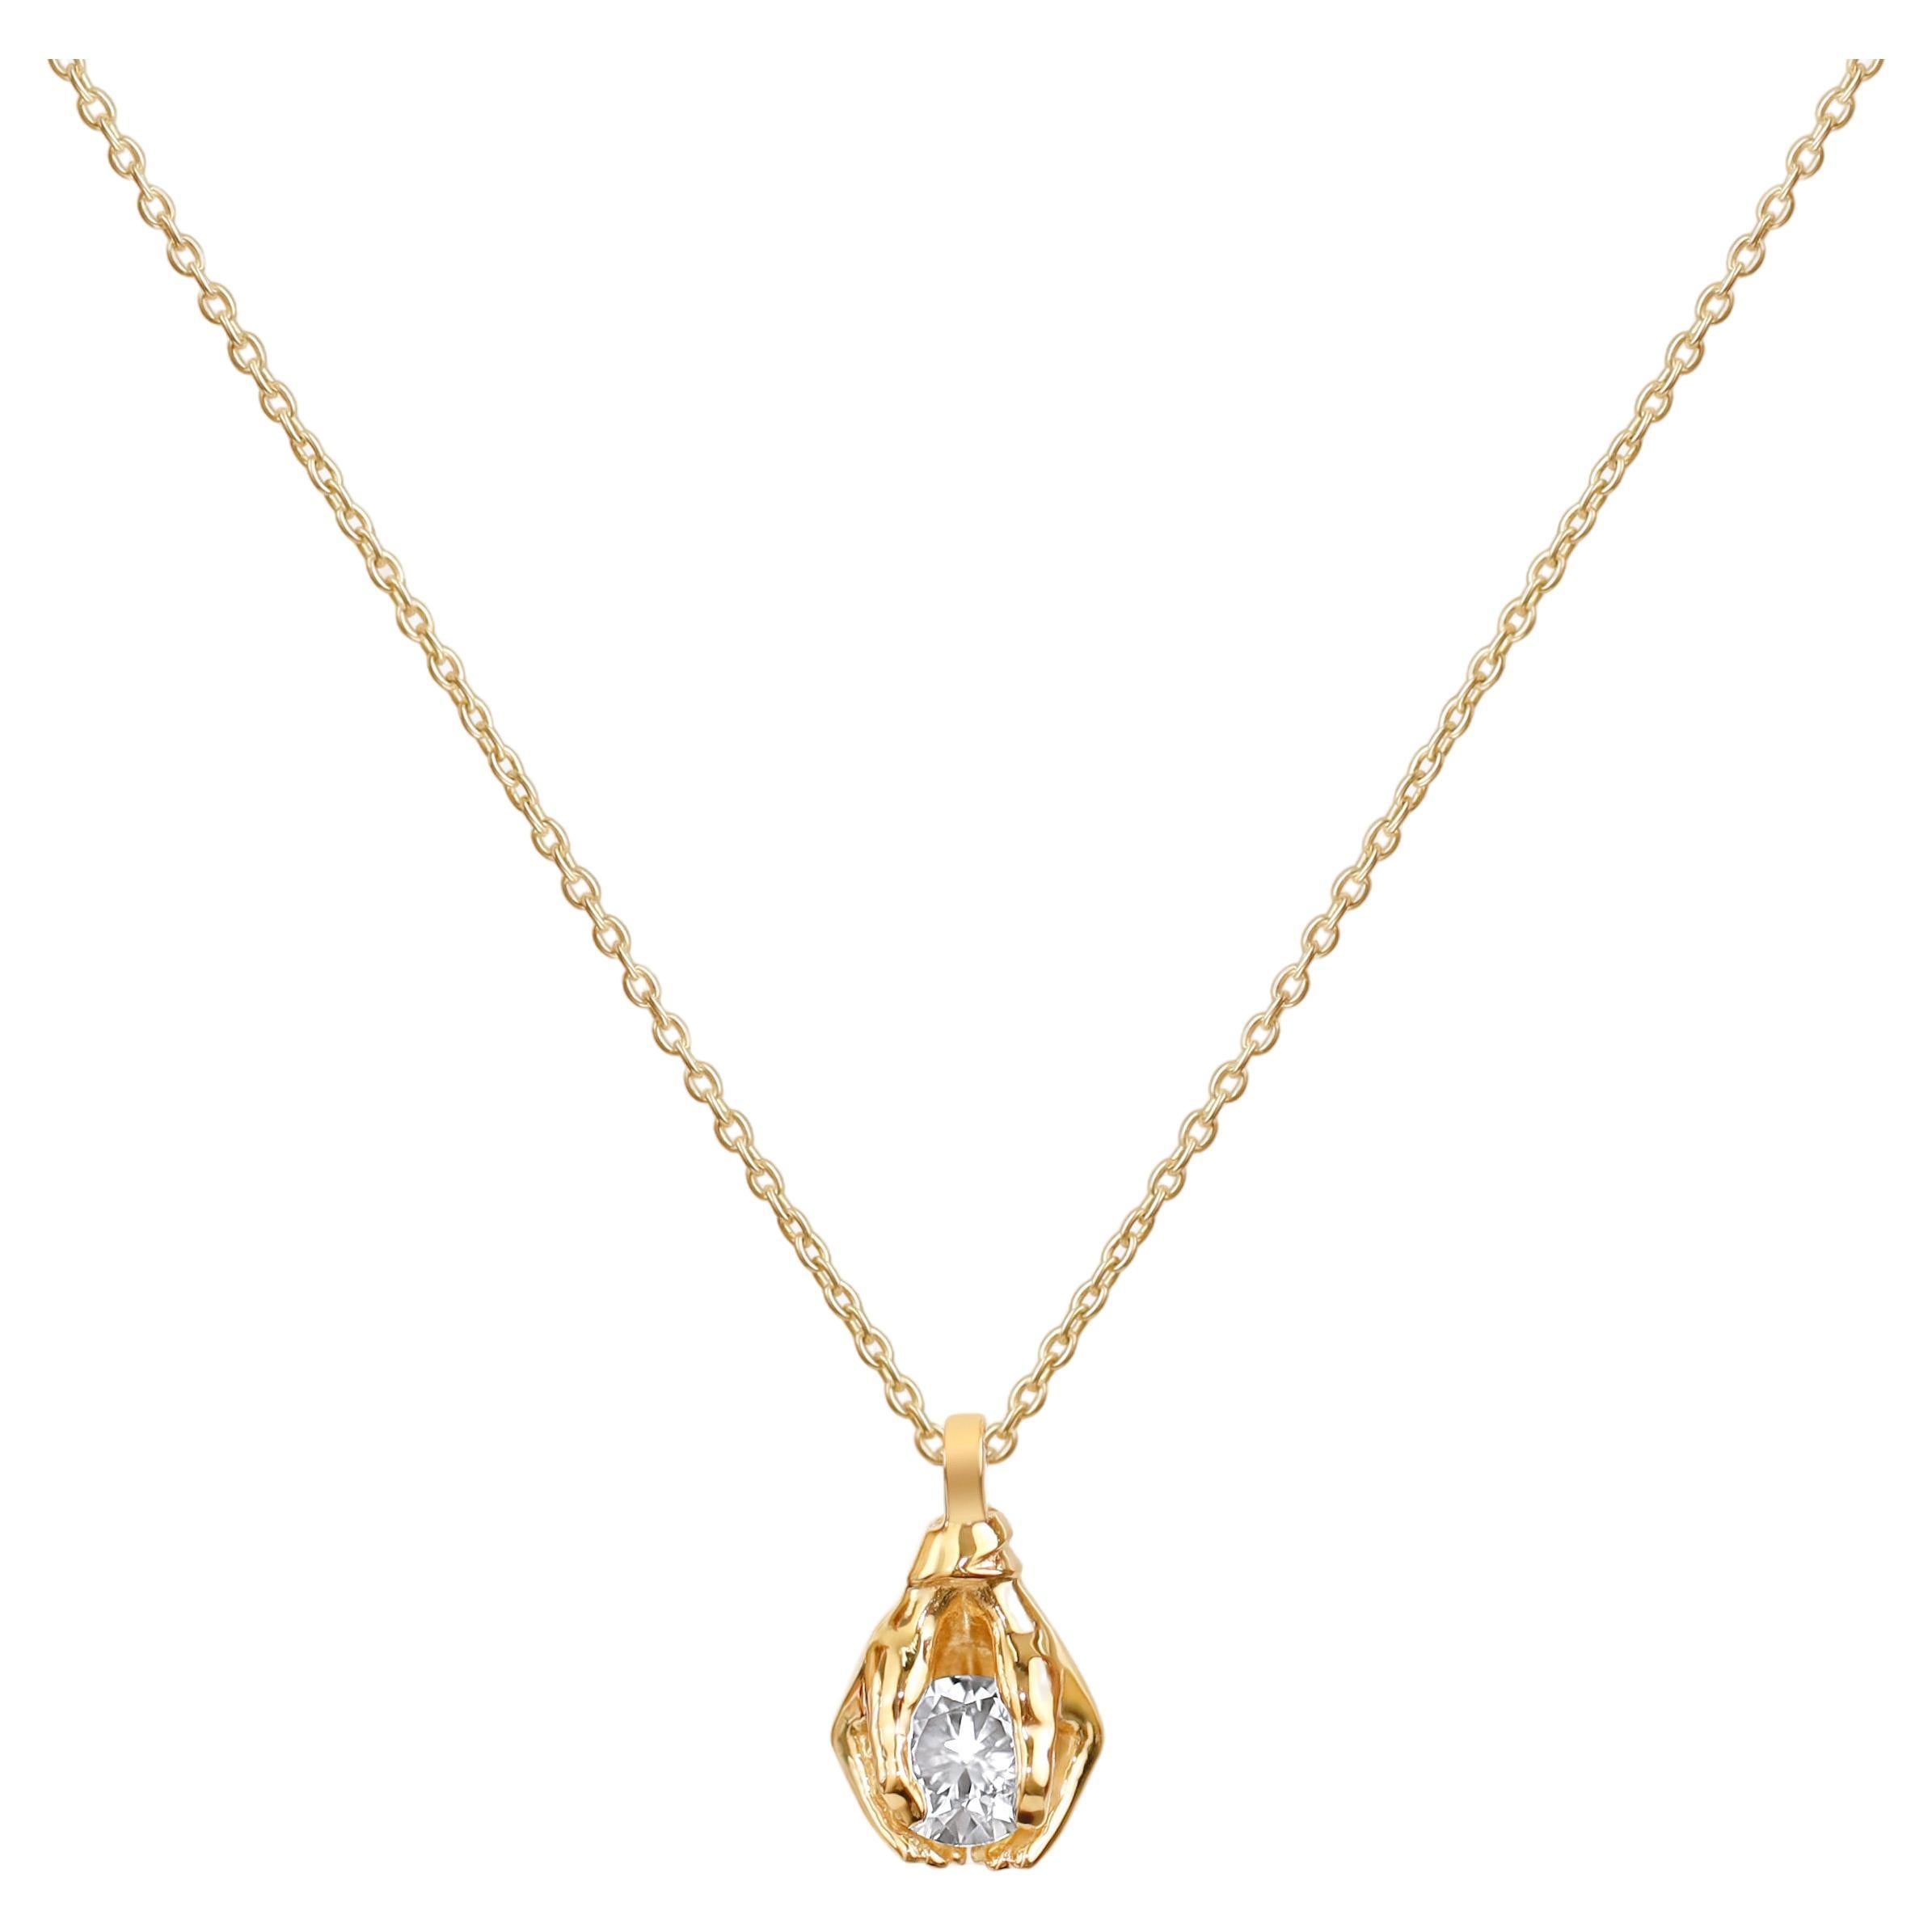 GIA Report Certified 1 Carat D Flawless Round Cut Diamond Pendant Necklace